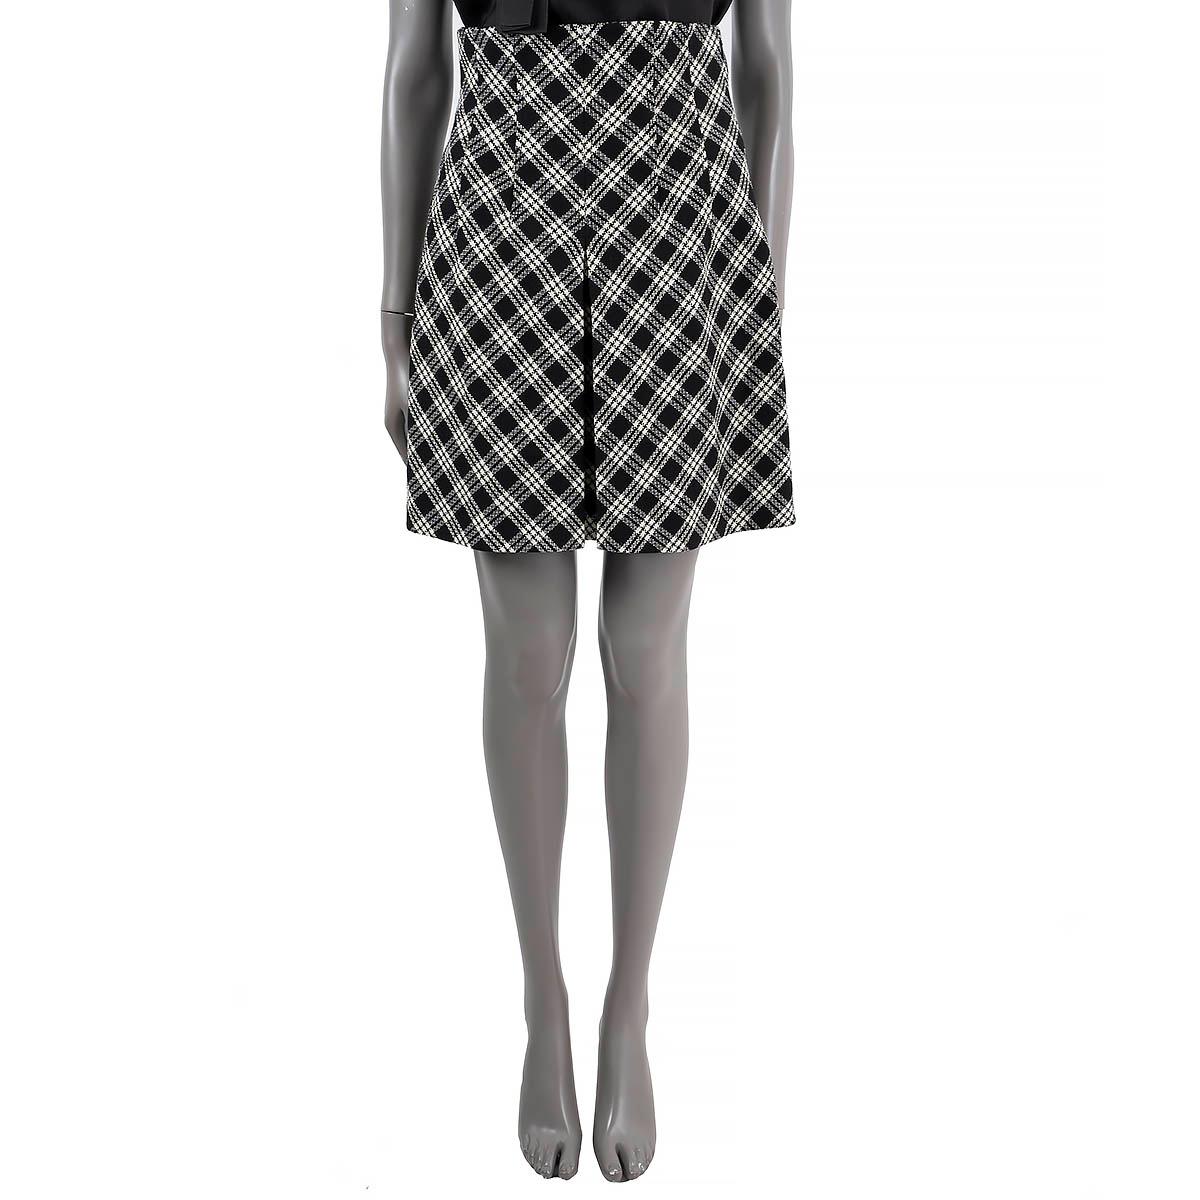 100% authentic Christian Dior Check'n'Dior mini skirt in black and white plaid wool (100% - please note the content tag is missing). Features a high waist, pleated and belt loops. Opens with a concealed zipper on the side and is lined in silk